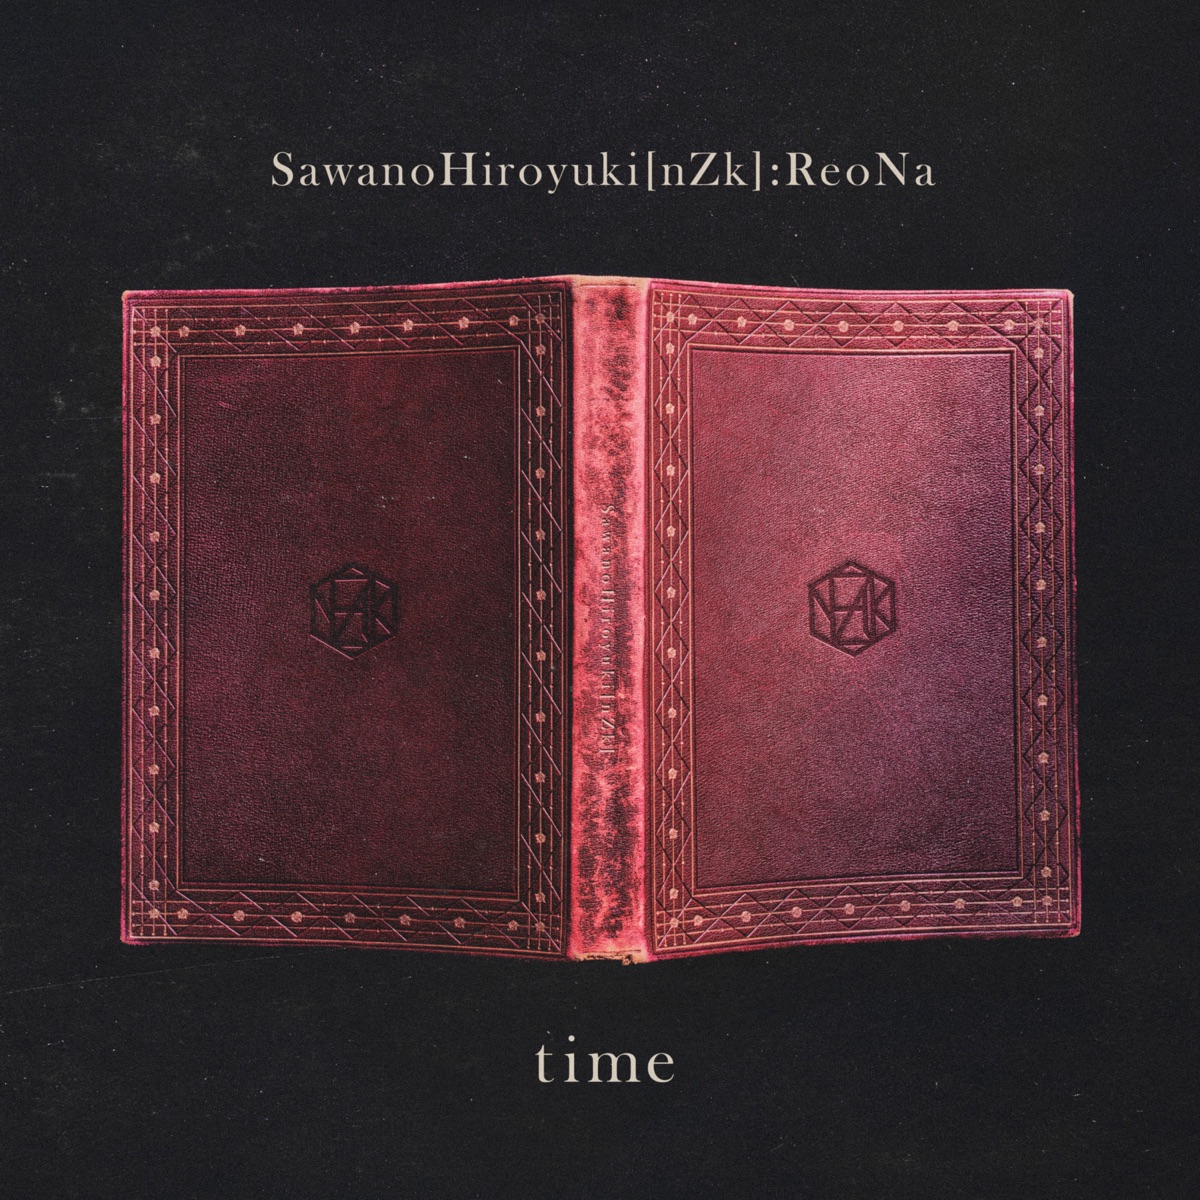 Cover art for『SawanoHiroyuki[nZk]:ReoNa - time』from the release『time』